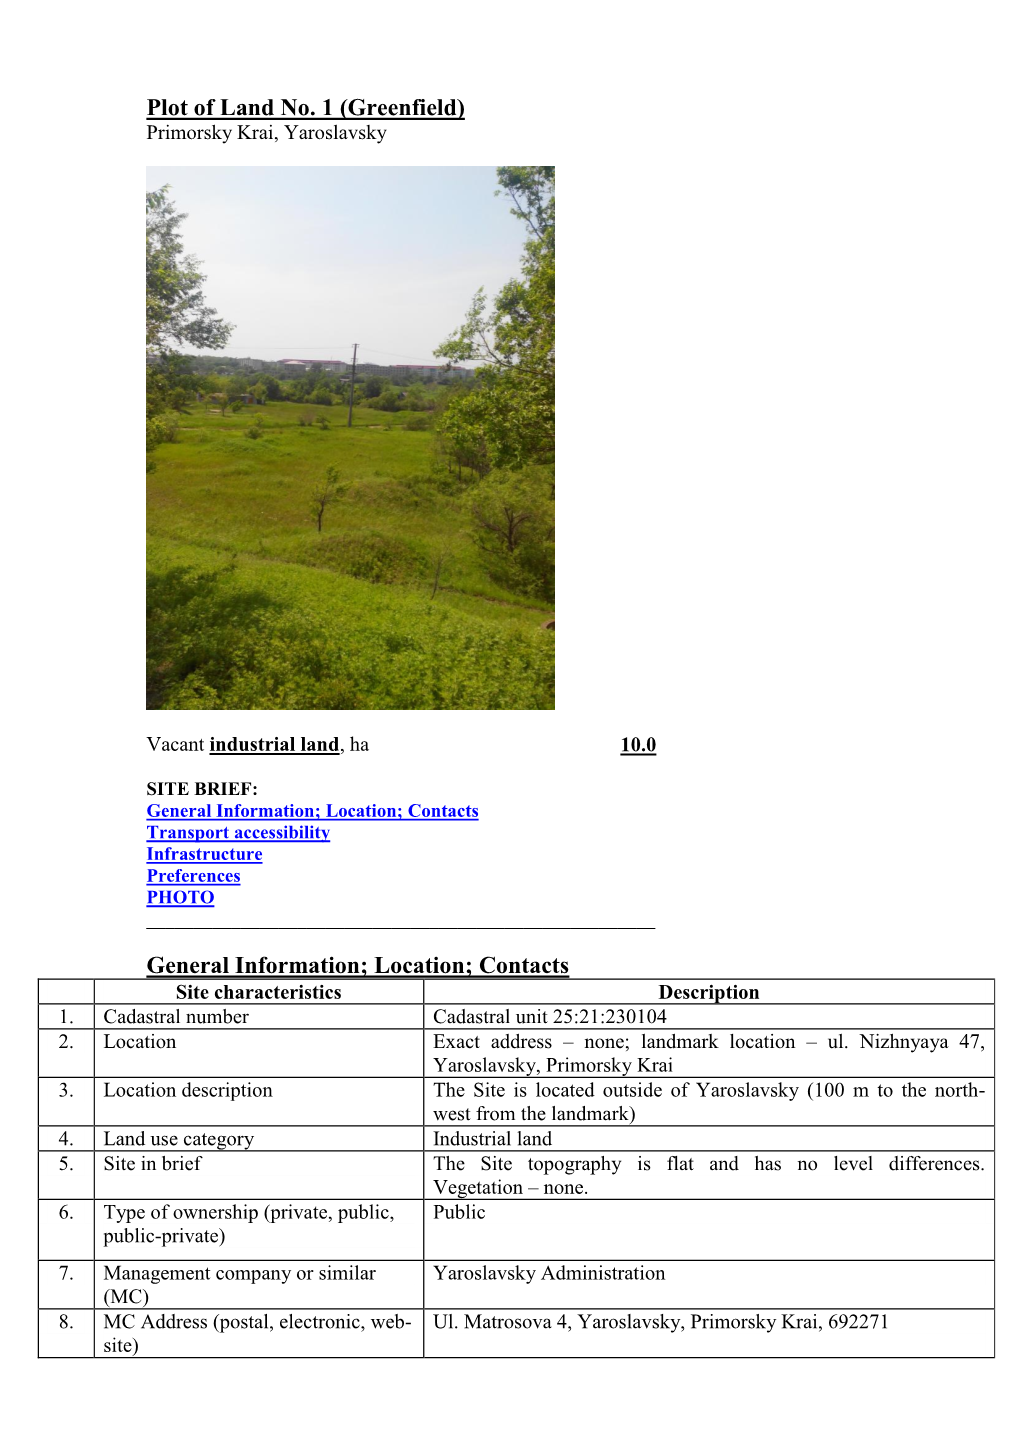 Plot of Land No. 1 (Greenfield) General Information; Location; Contacts